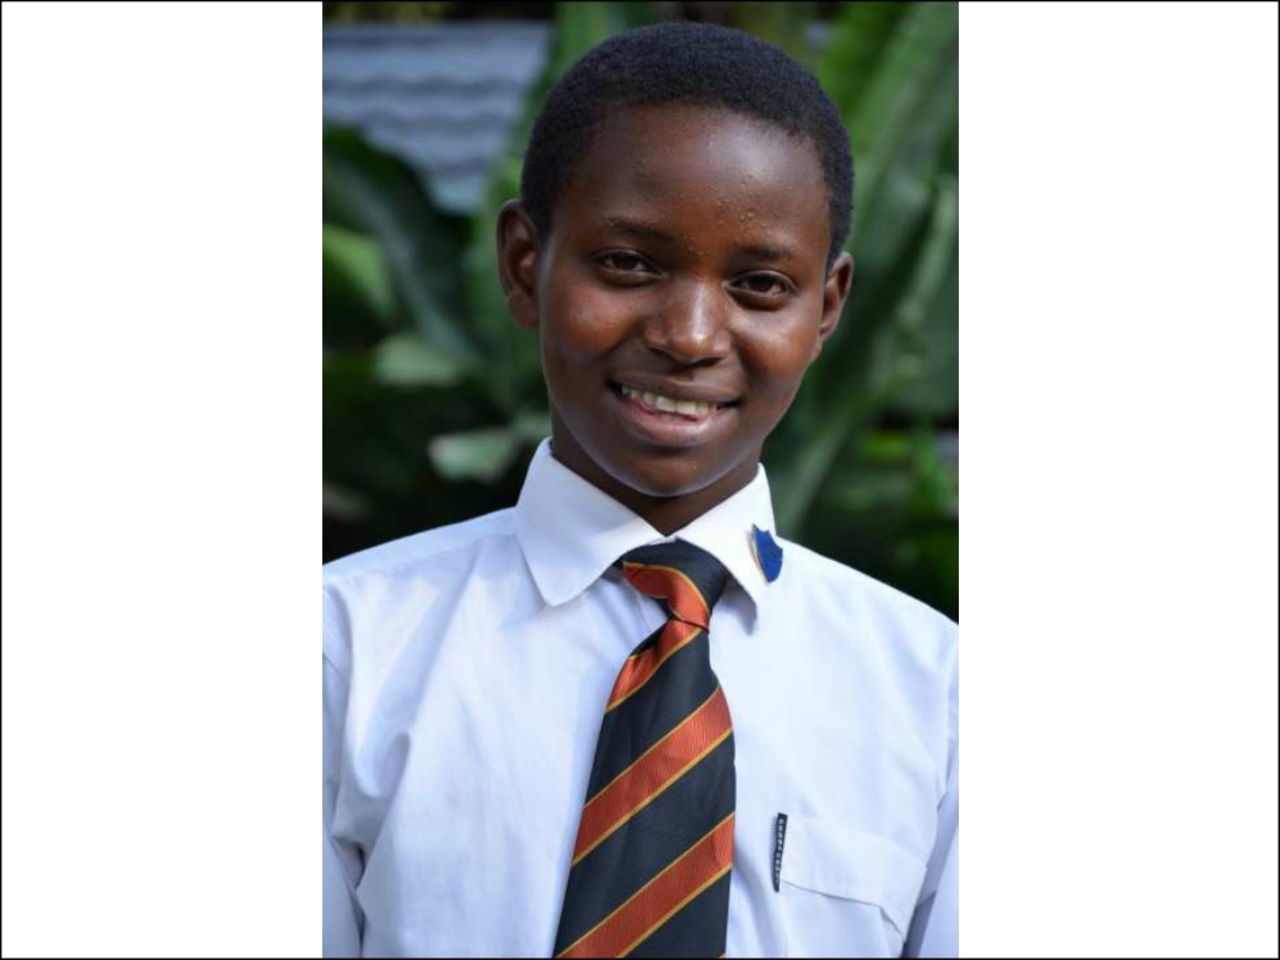 Turere has now been given a scholarship at Brookhouse International School, one of Kenya's top educational institutions.